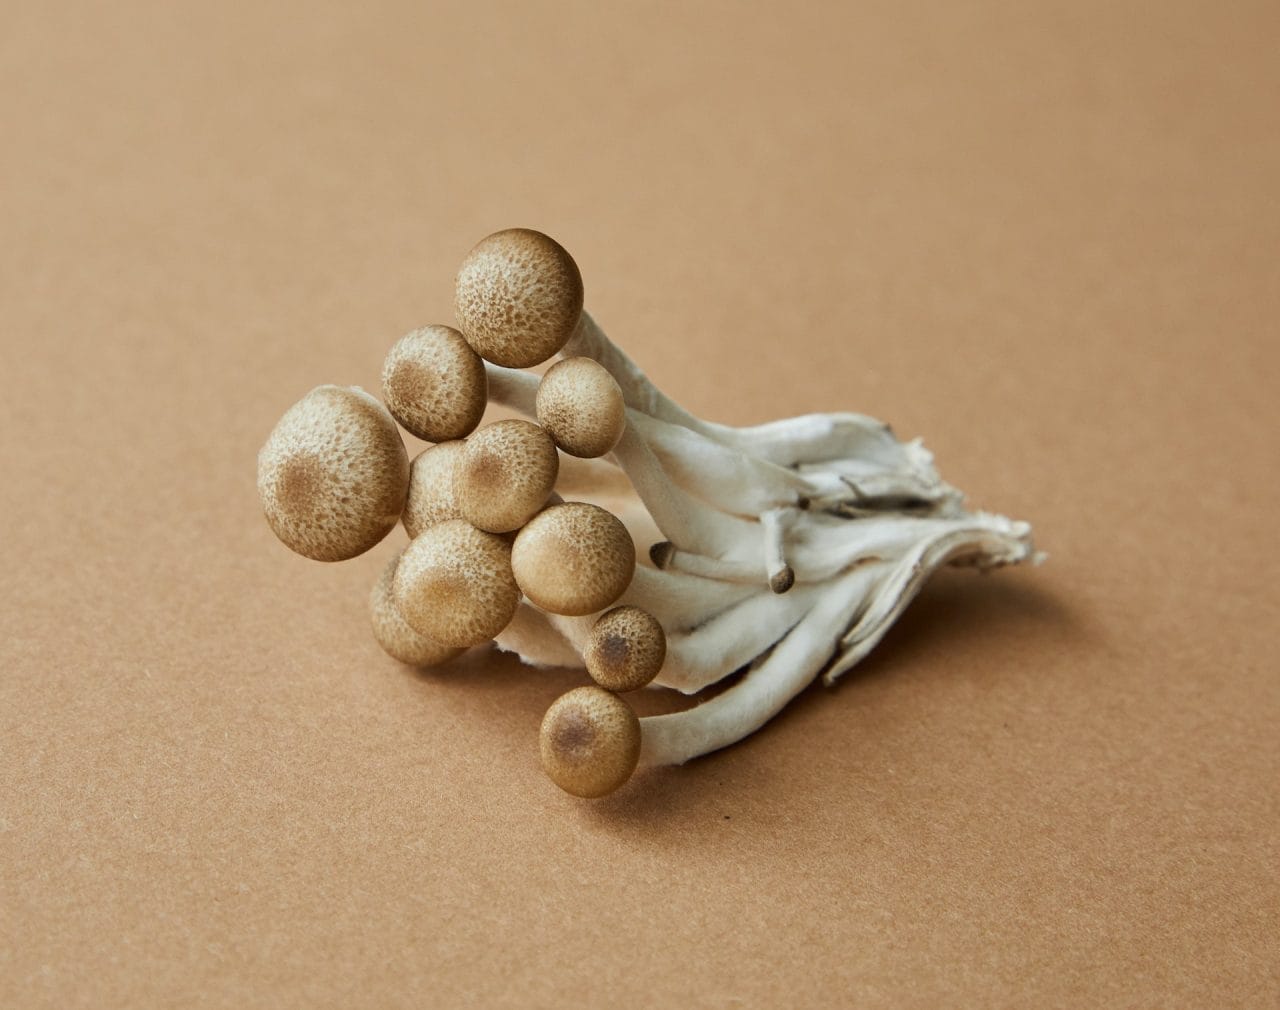 Penis Envy: A Closer Look at the Strongest Mushroom Strain